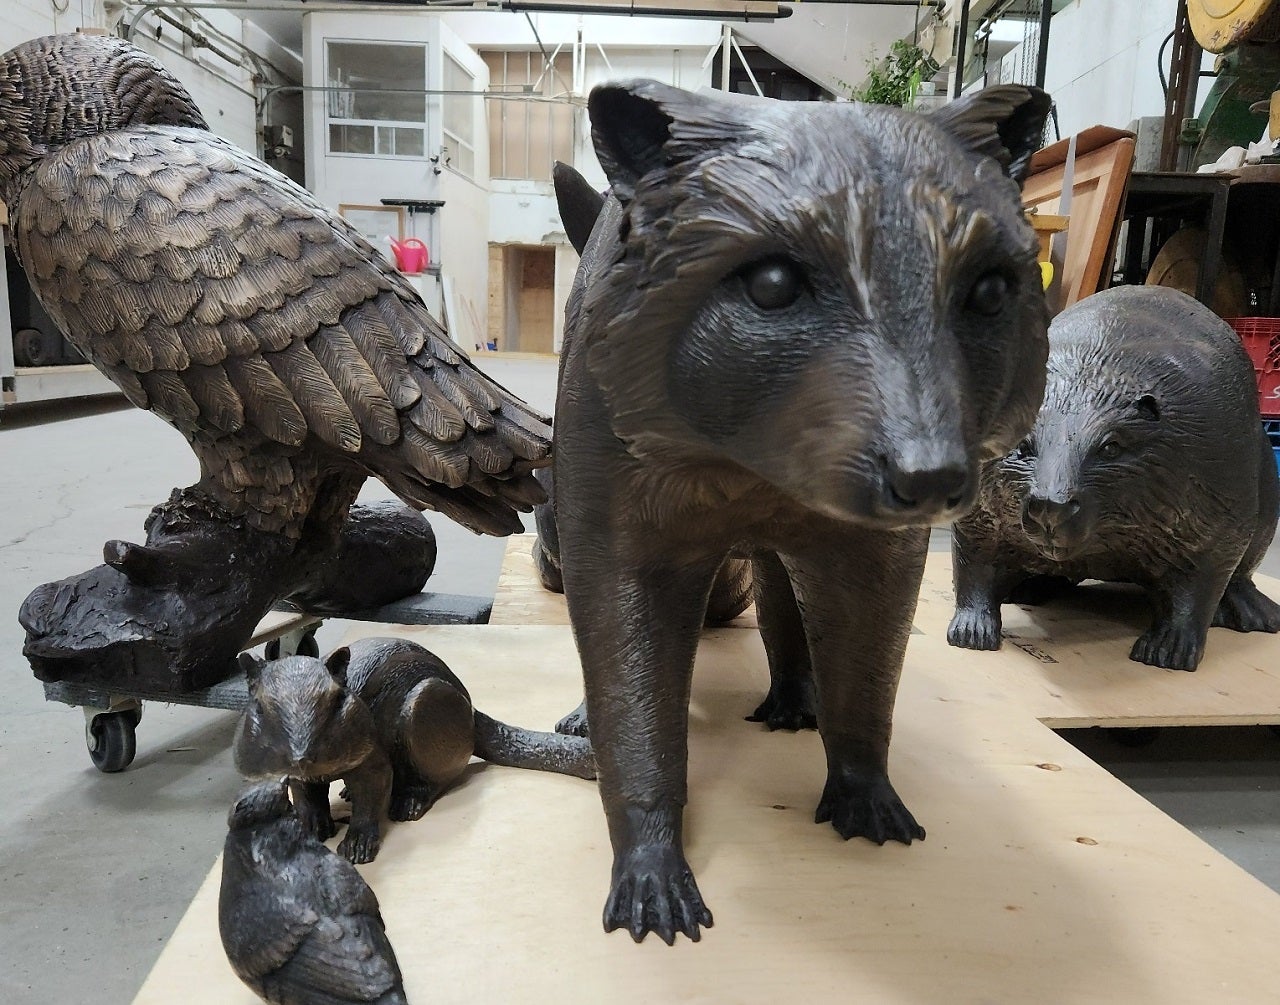 large bronze statues of animals